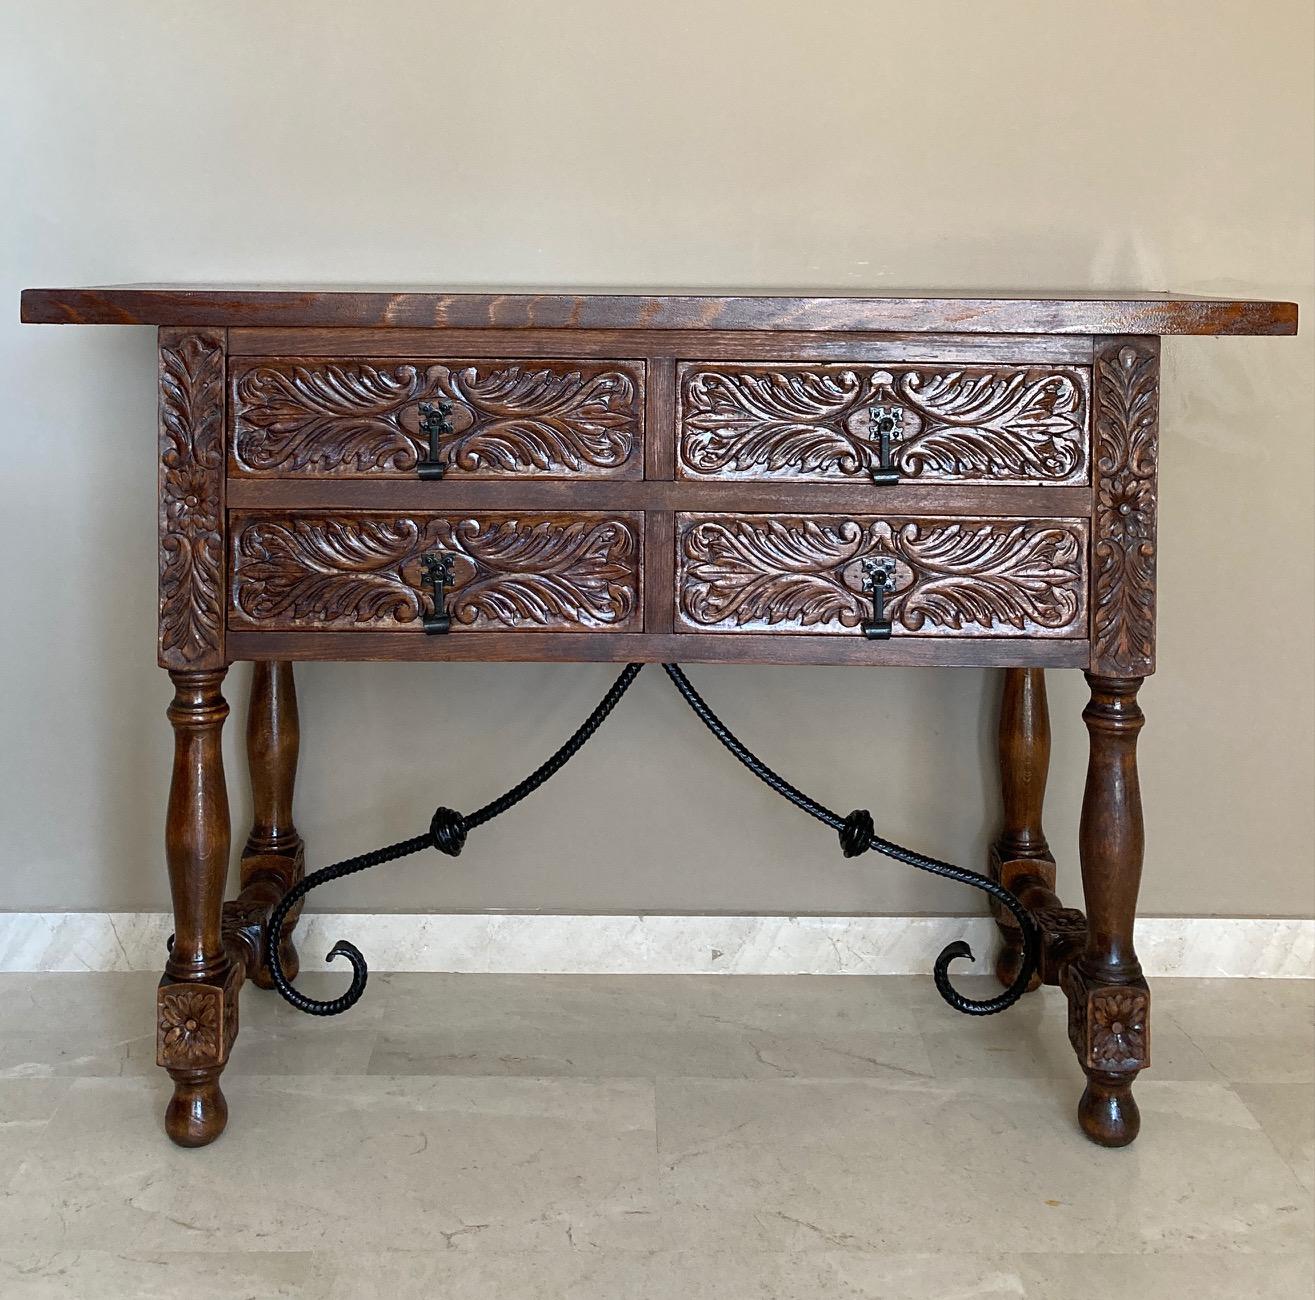 20th century Spanish carved walnut console sofa table with four drawers and iron stretcher
You can use like a commode or chest of drawers
This elegant antique walnut console was crafted in Spain, circa 1900. The sofa table with four legs and